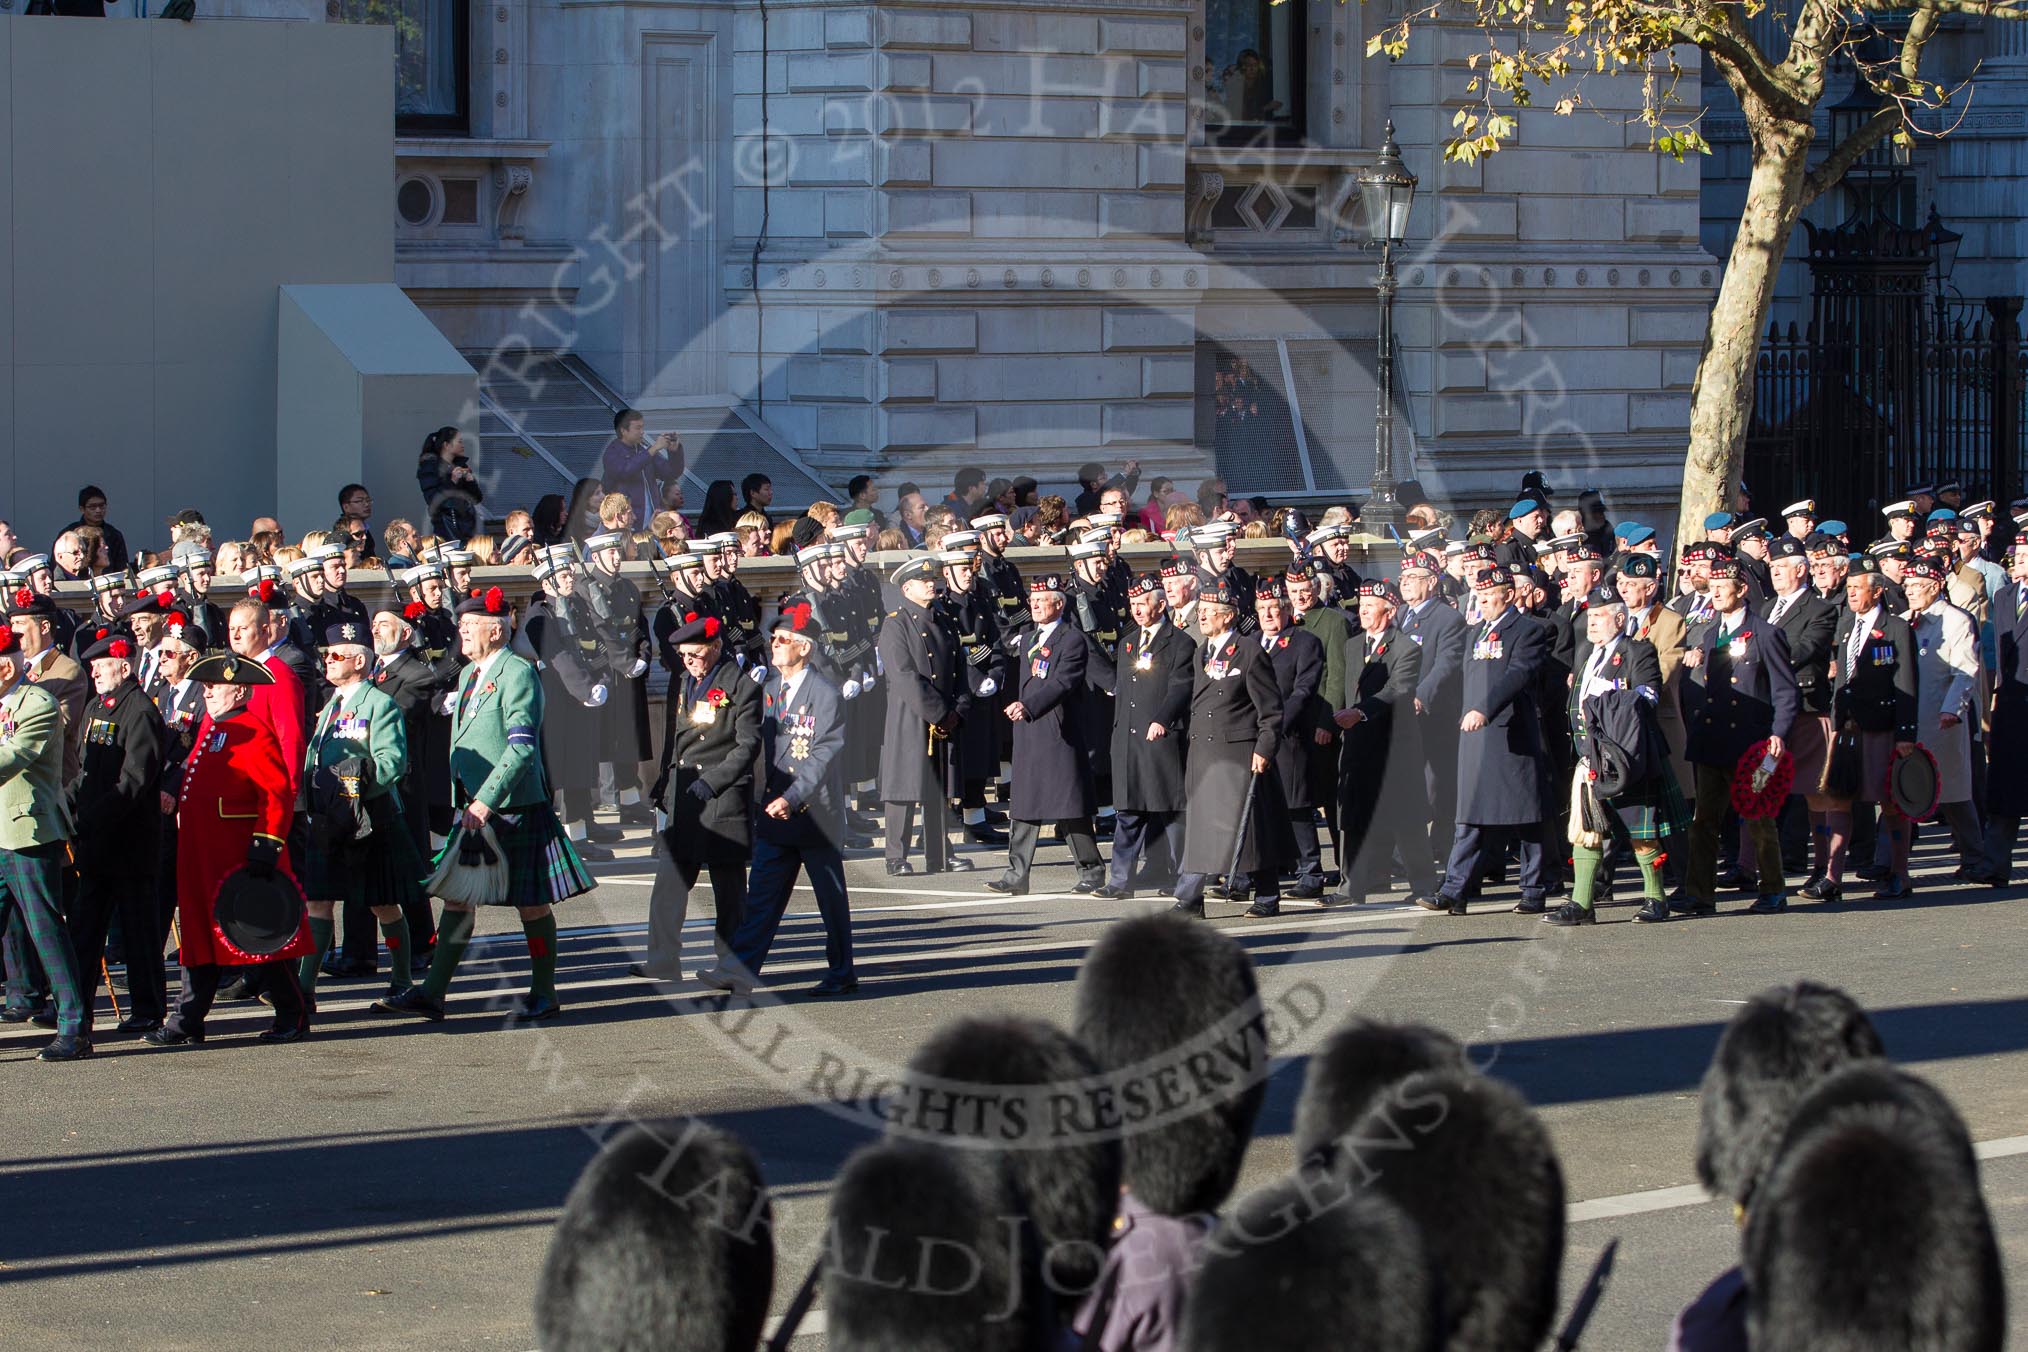 Remembrance Sunday 2012 Cenotaph March Past: Group A23 - Black Watch Association and A24 - Gordon Highlanders Association..
Whitehall, Cenotaph,
London SW1,

United Kingdom,
on 11 November 2012 at 11:52, image #725